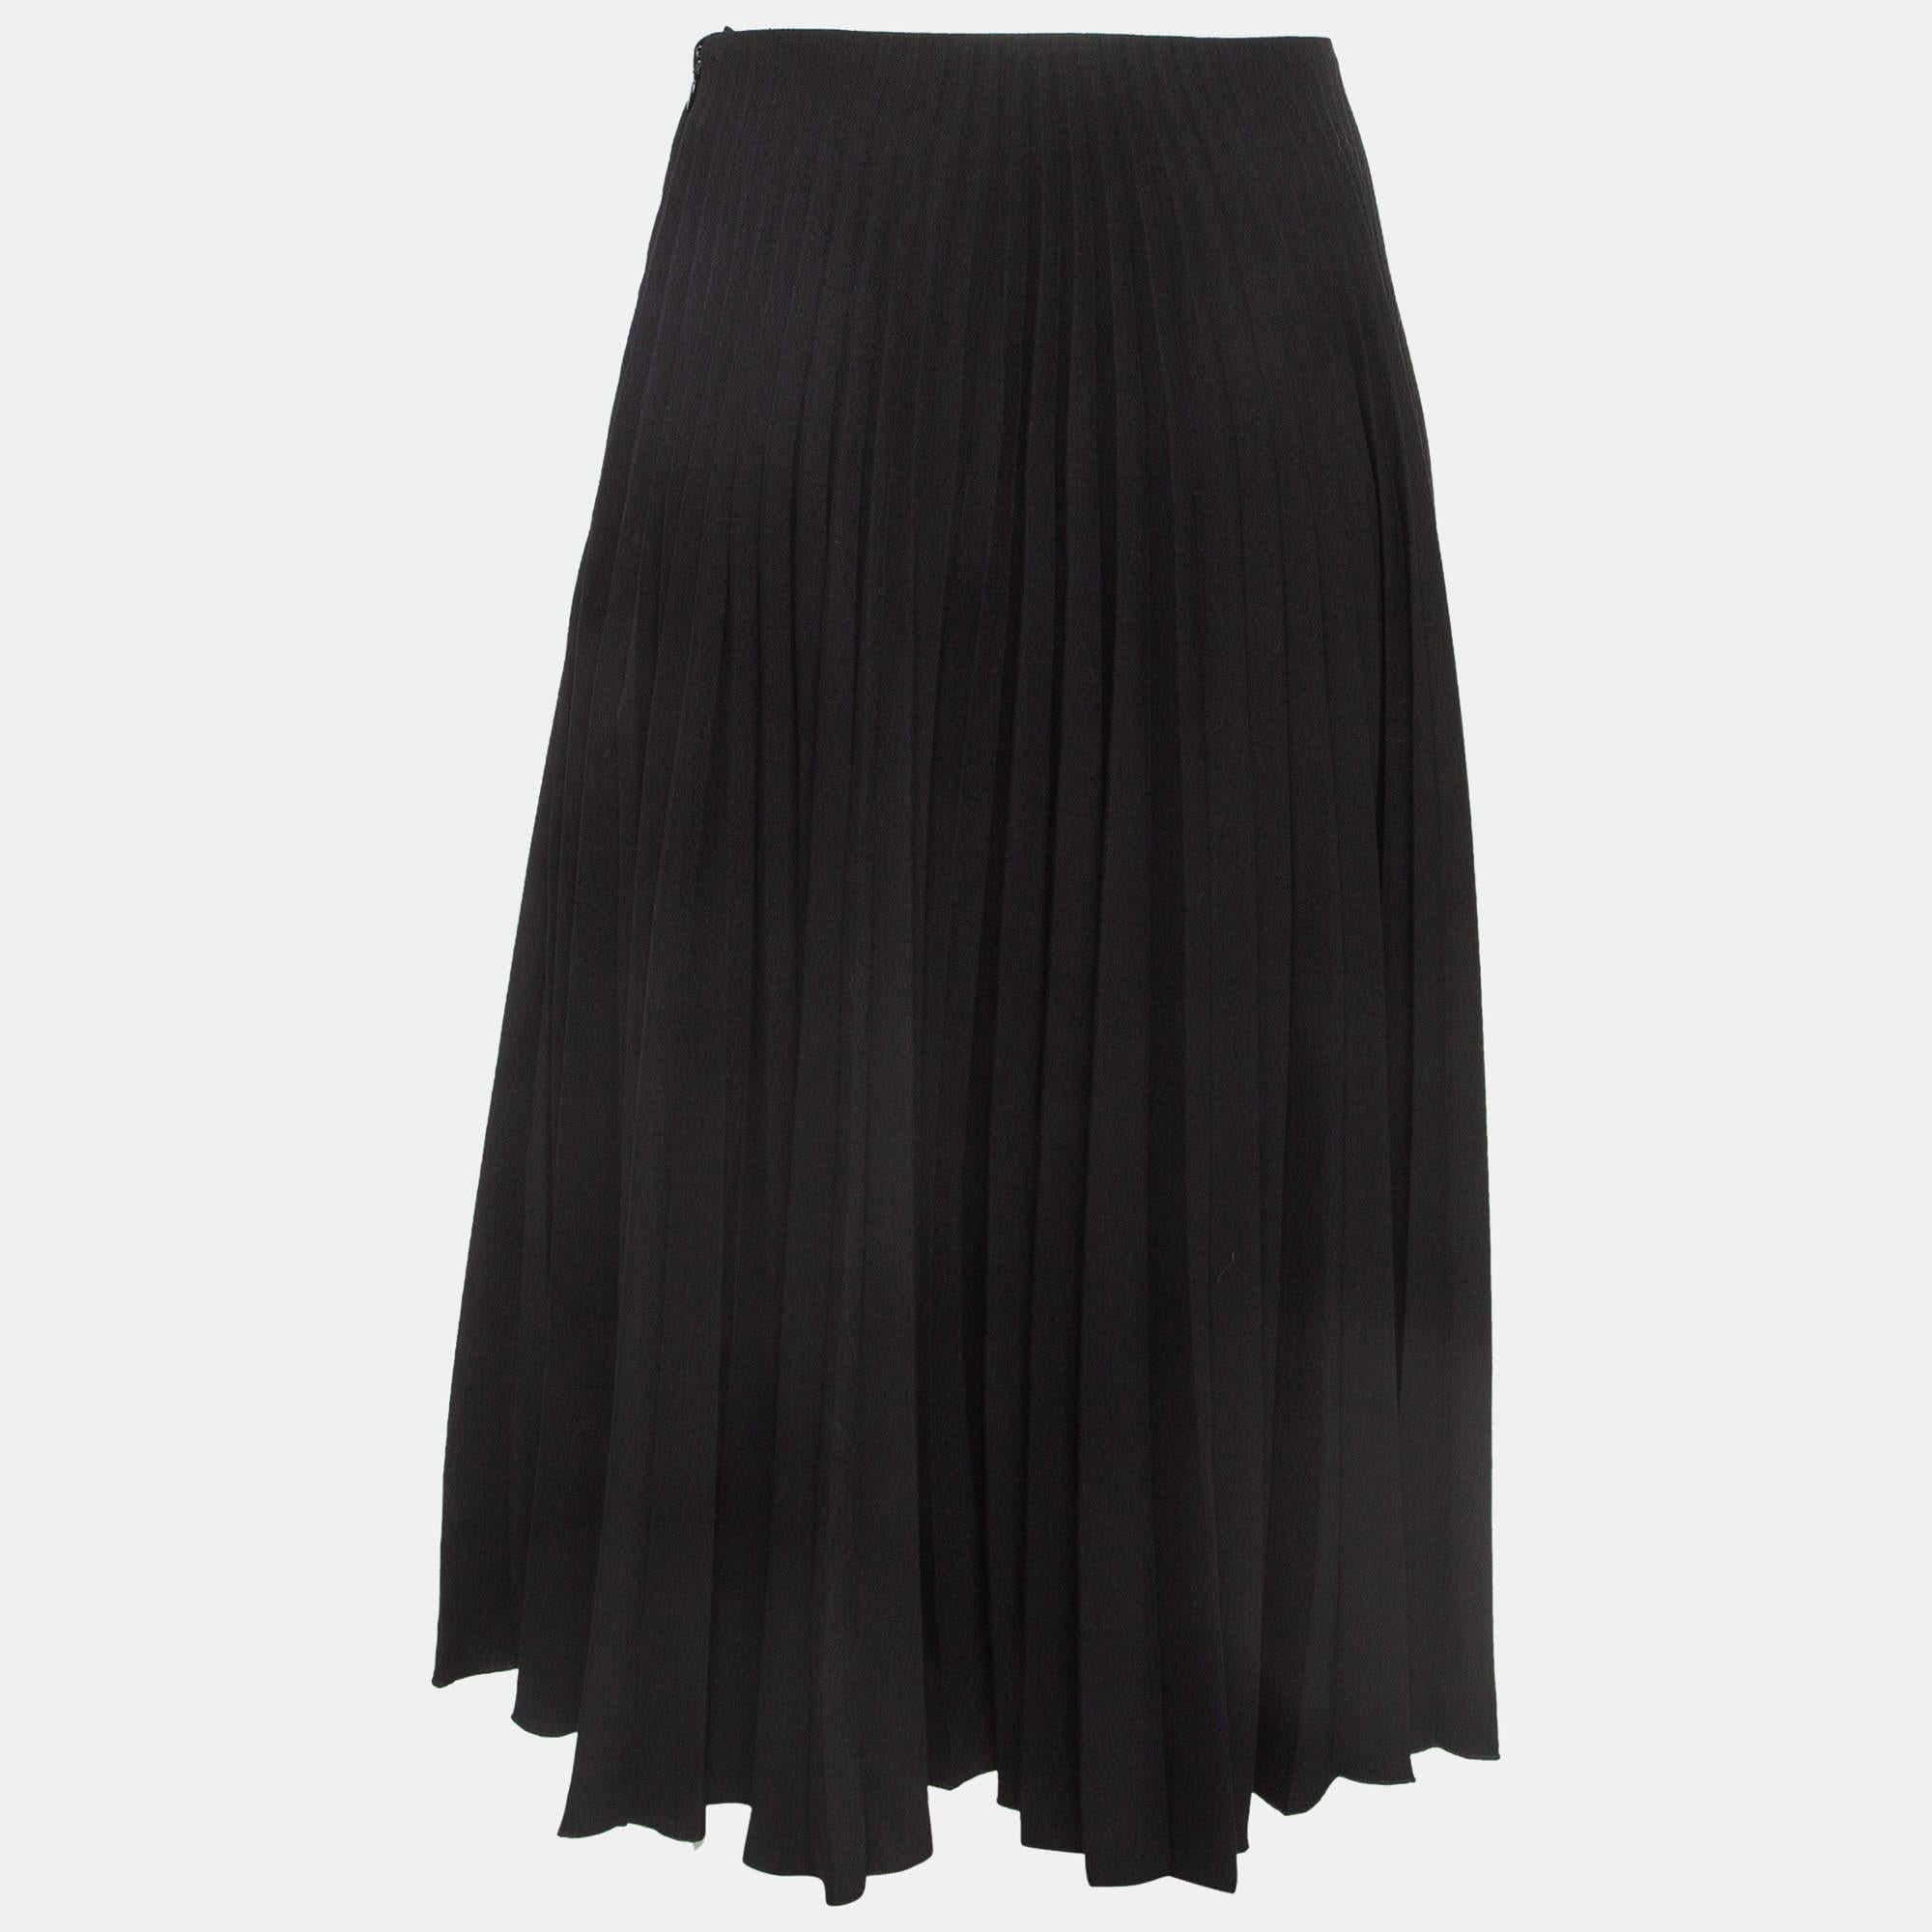 Make a fashionable edit with this Valentino skirt. Carefully tailored, the dress falls beautifully in small pleats thus creating a lovely shape and look.

